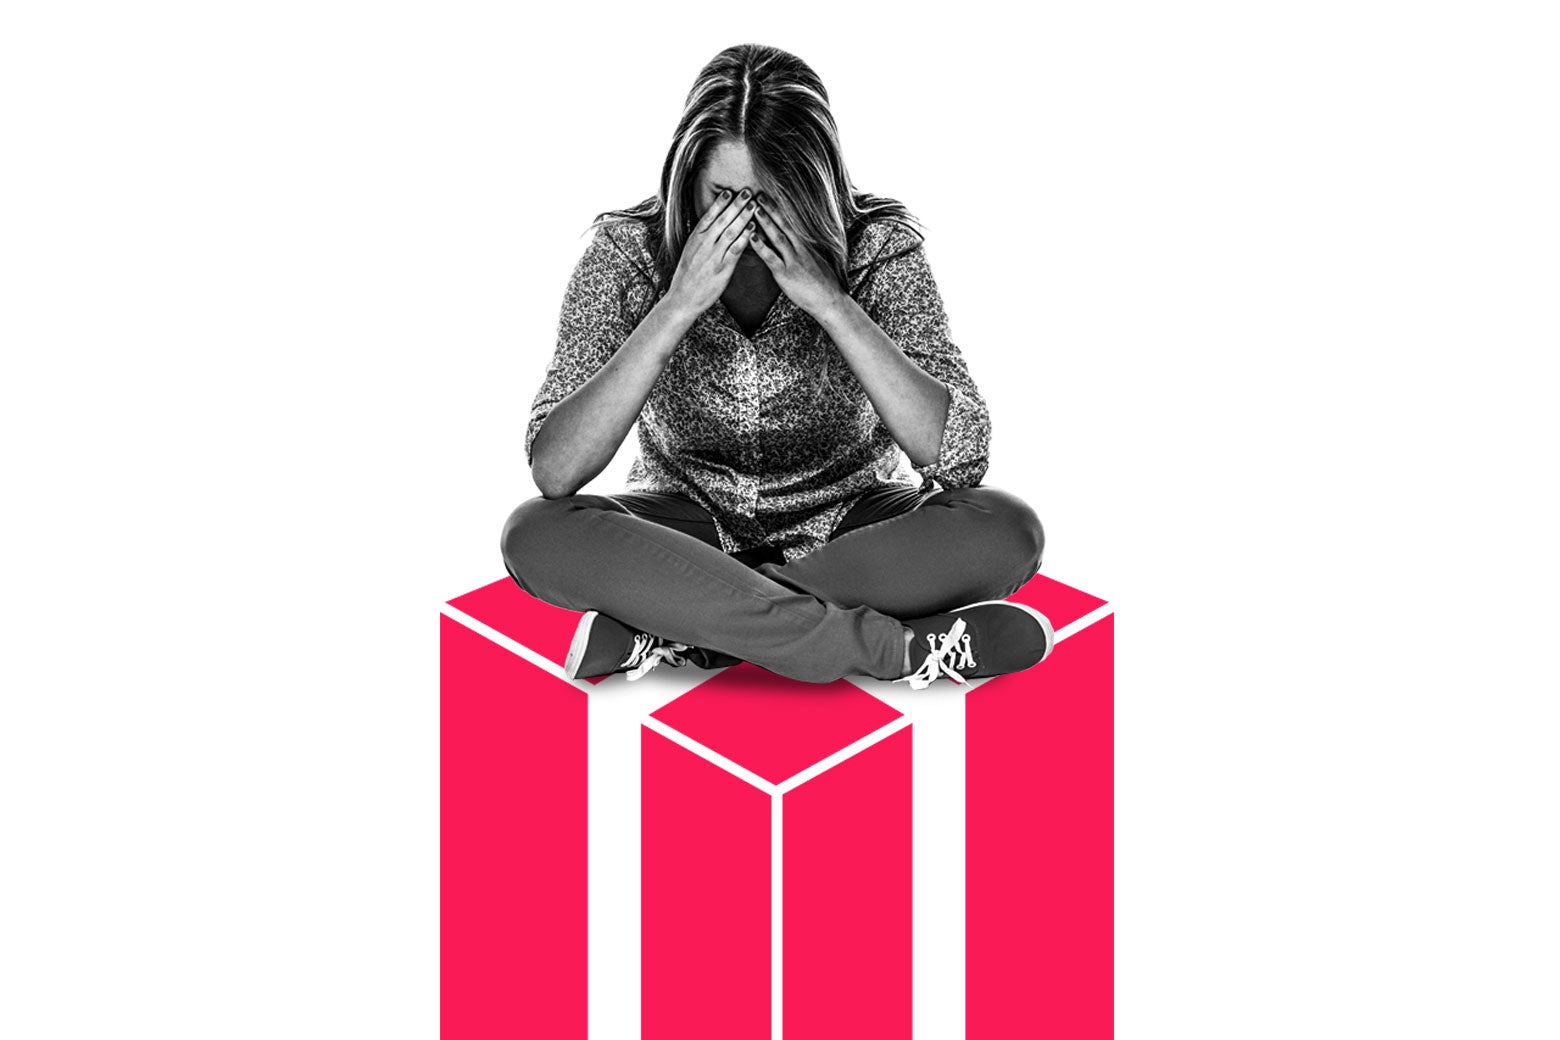 A woman sits with her hands over her face on top of an illustrated present.